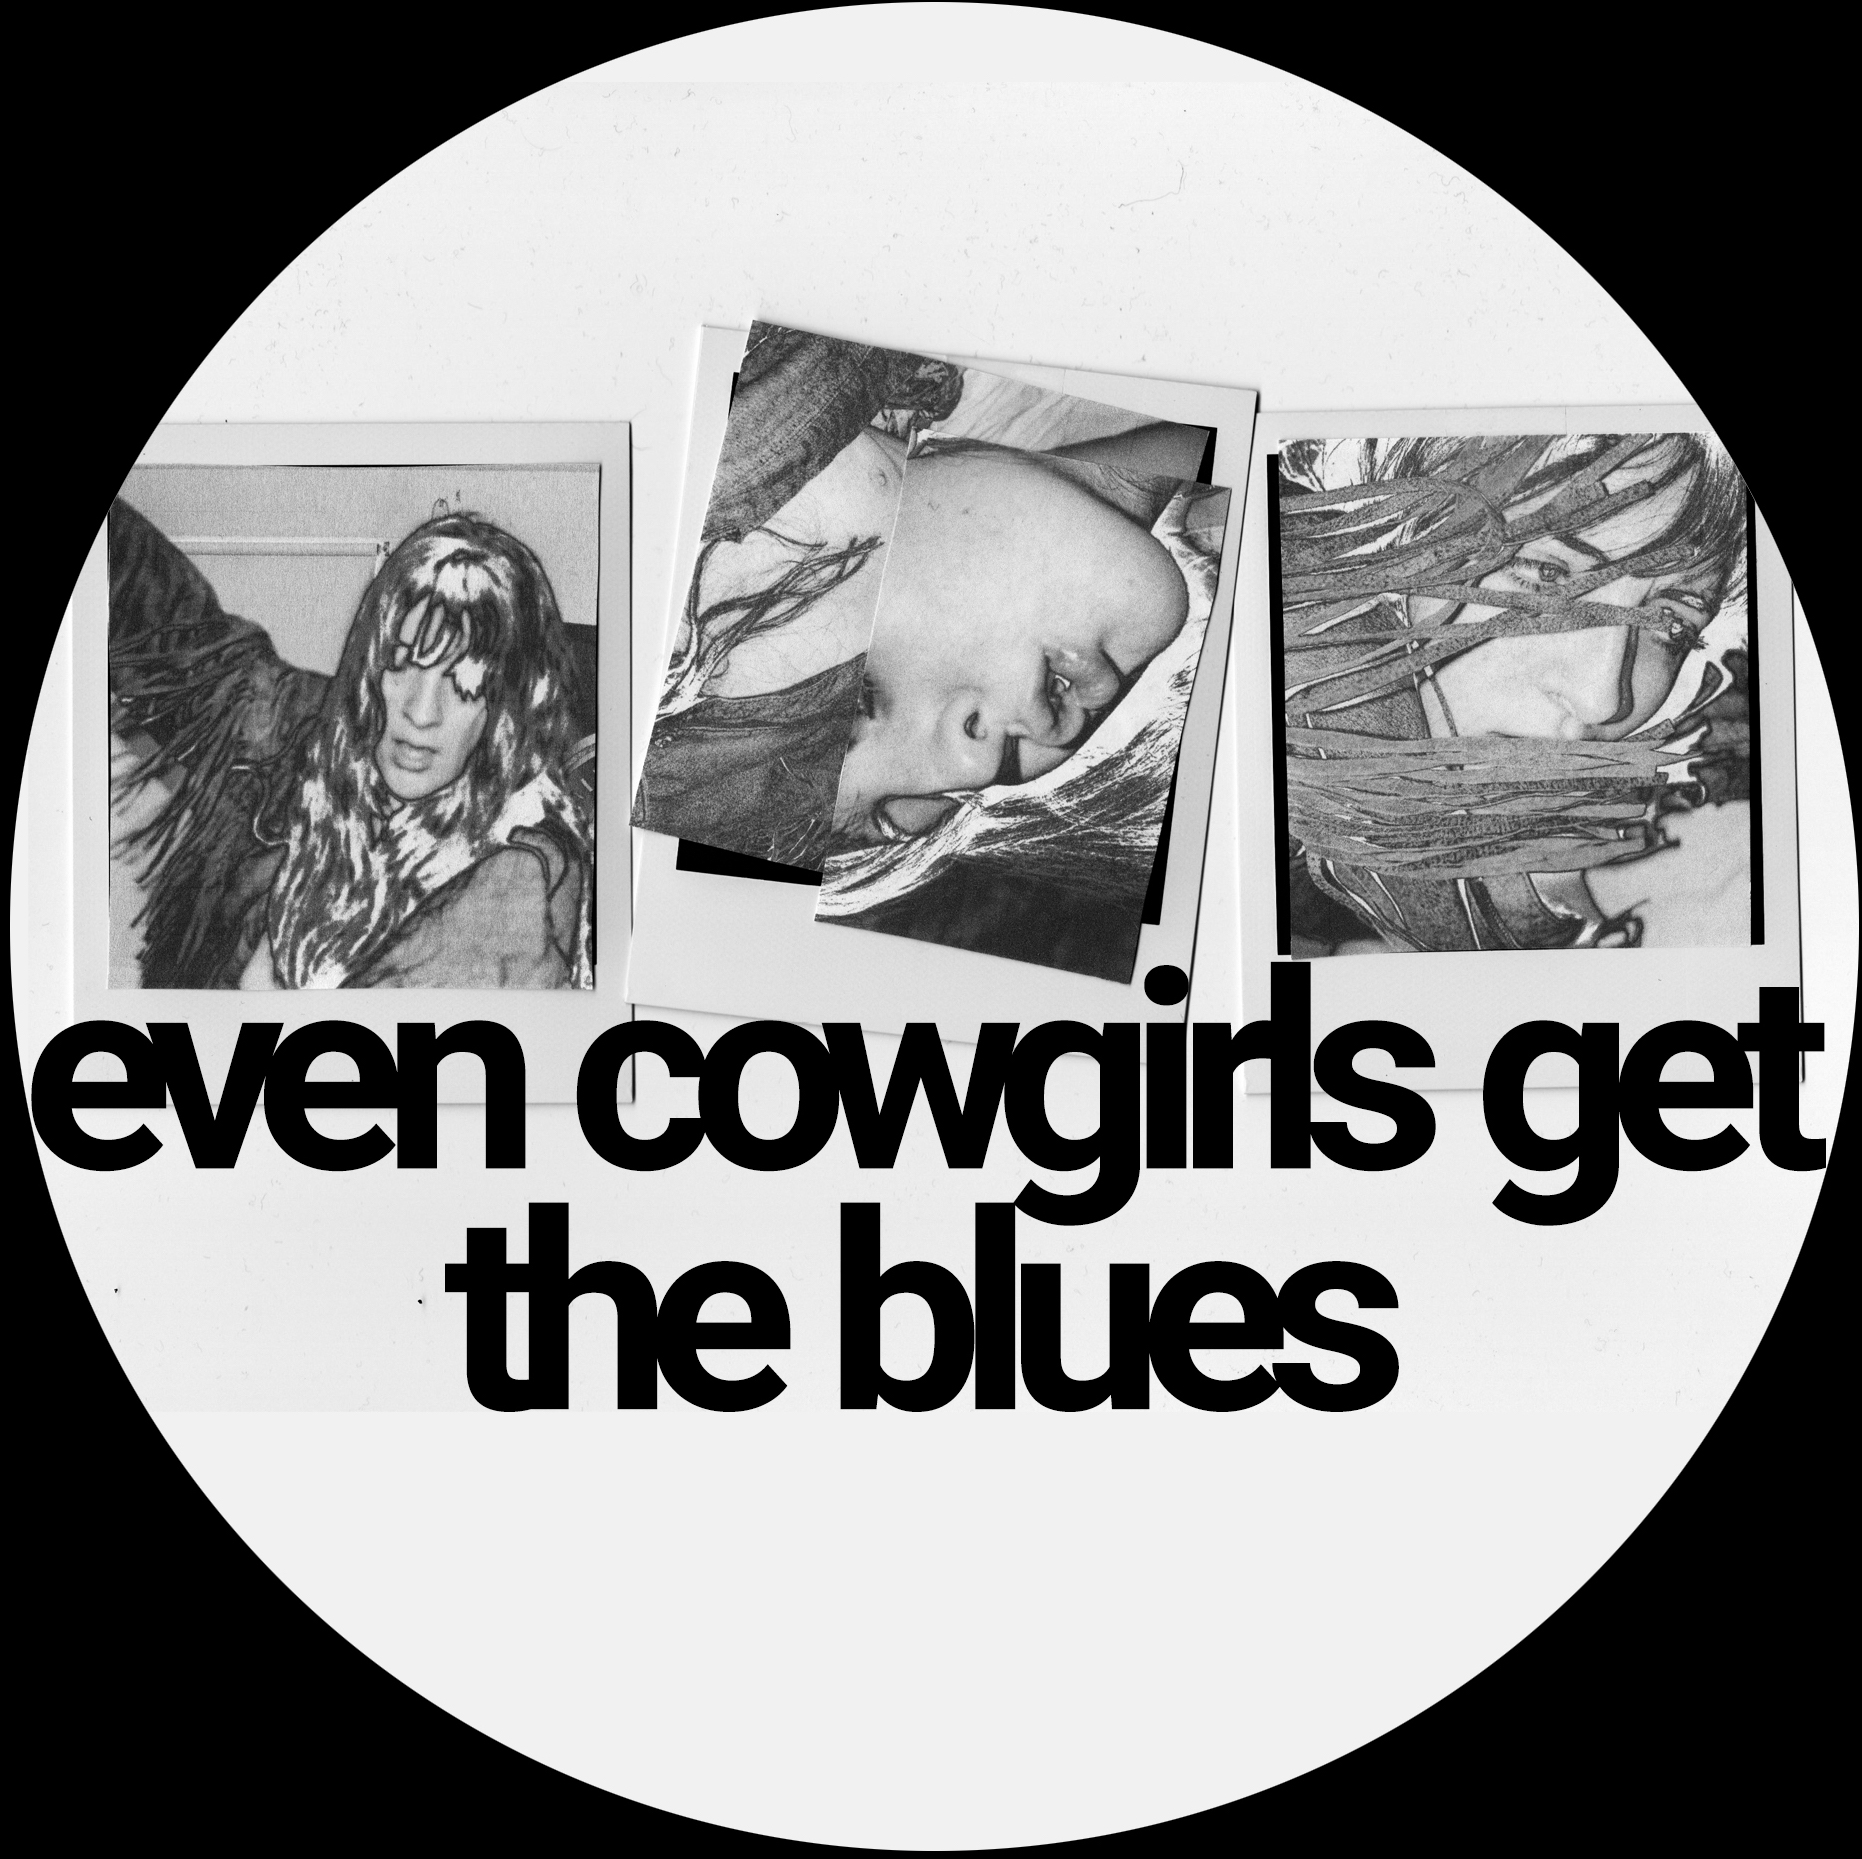 Three polaroids in a row of a woman in a cowgilr jacket. The images are polaroids and in black and white and the text under them says even cowgirls get the blues